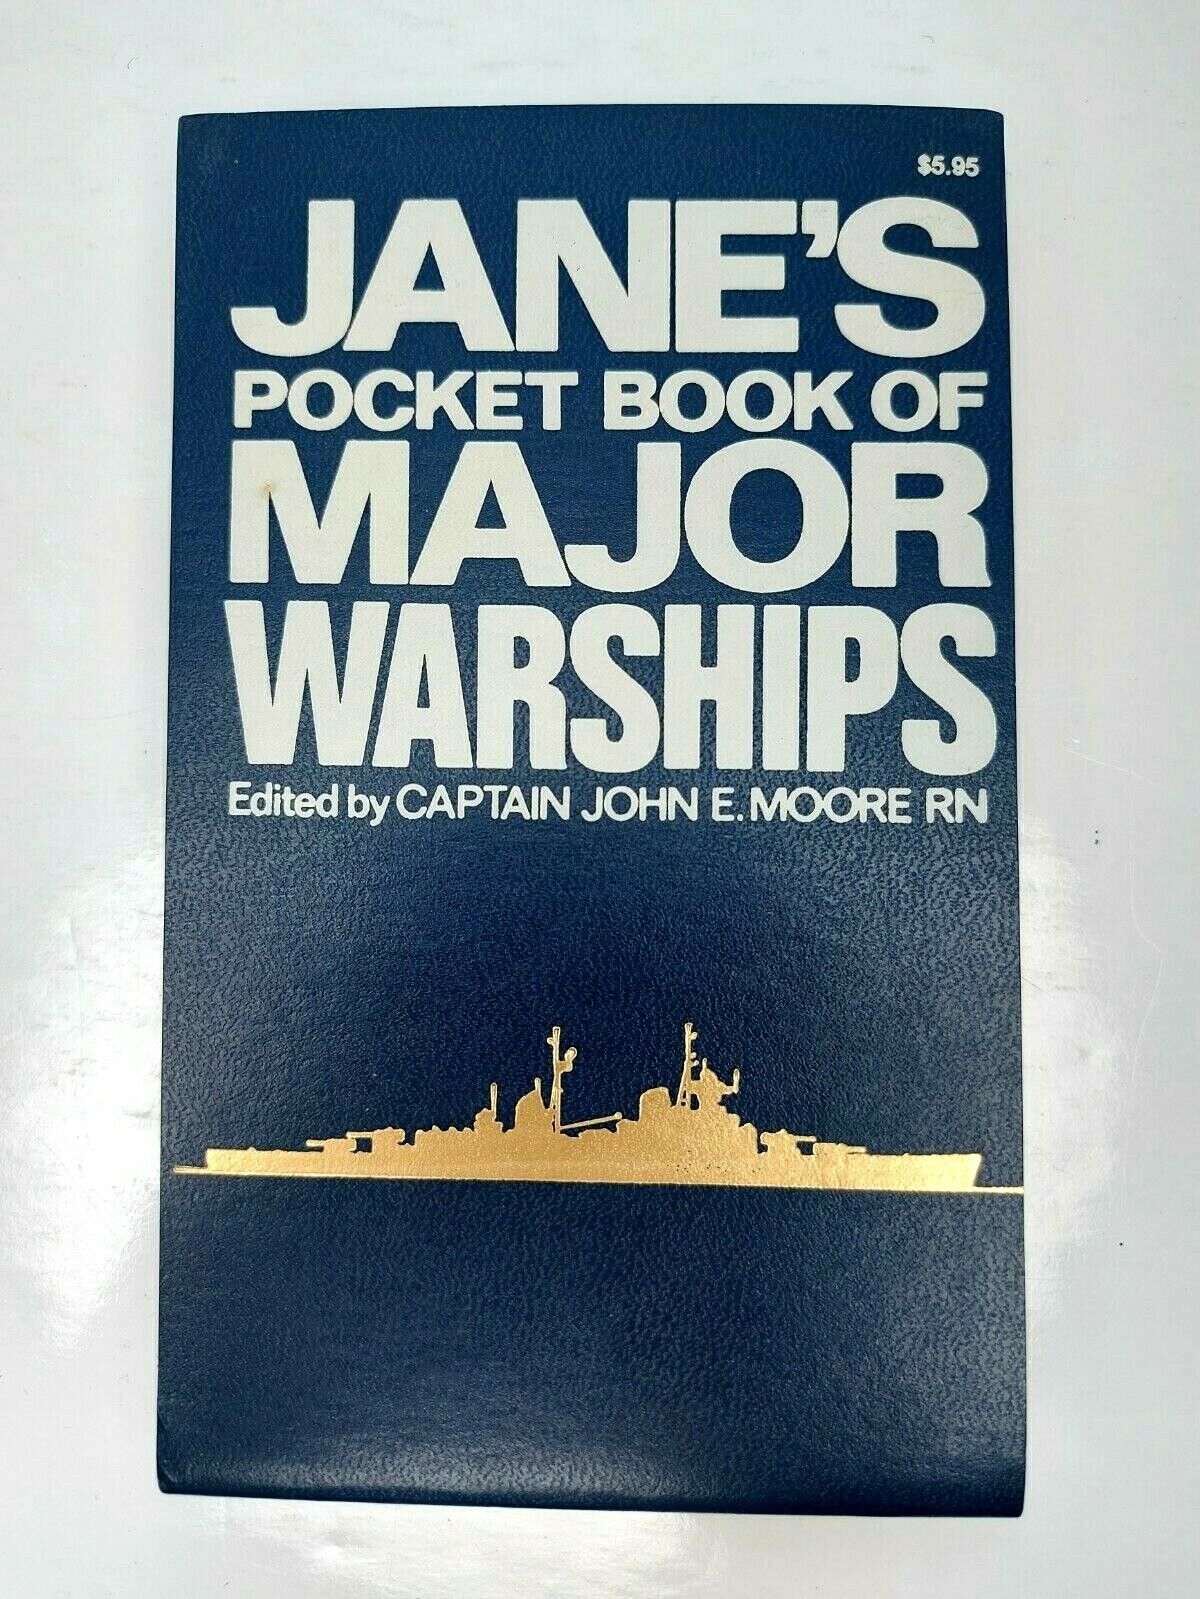 Jane's Pocket Book of Major Warships edited by Cpt John Moore RN 1979 